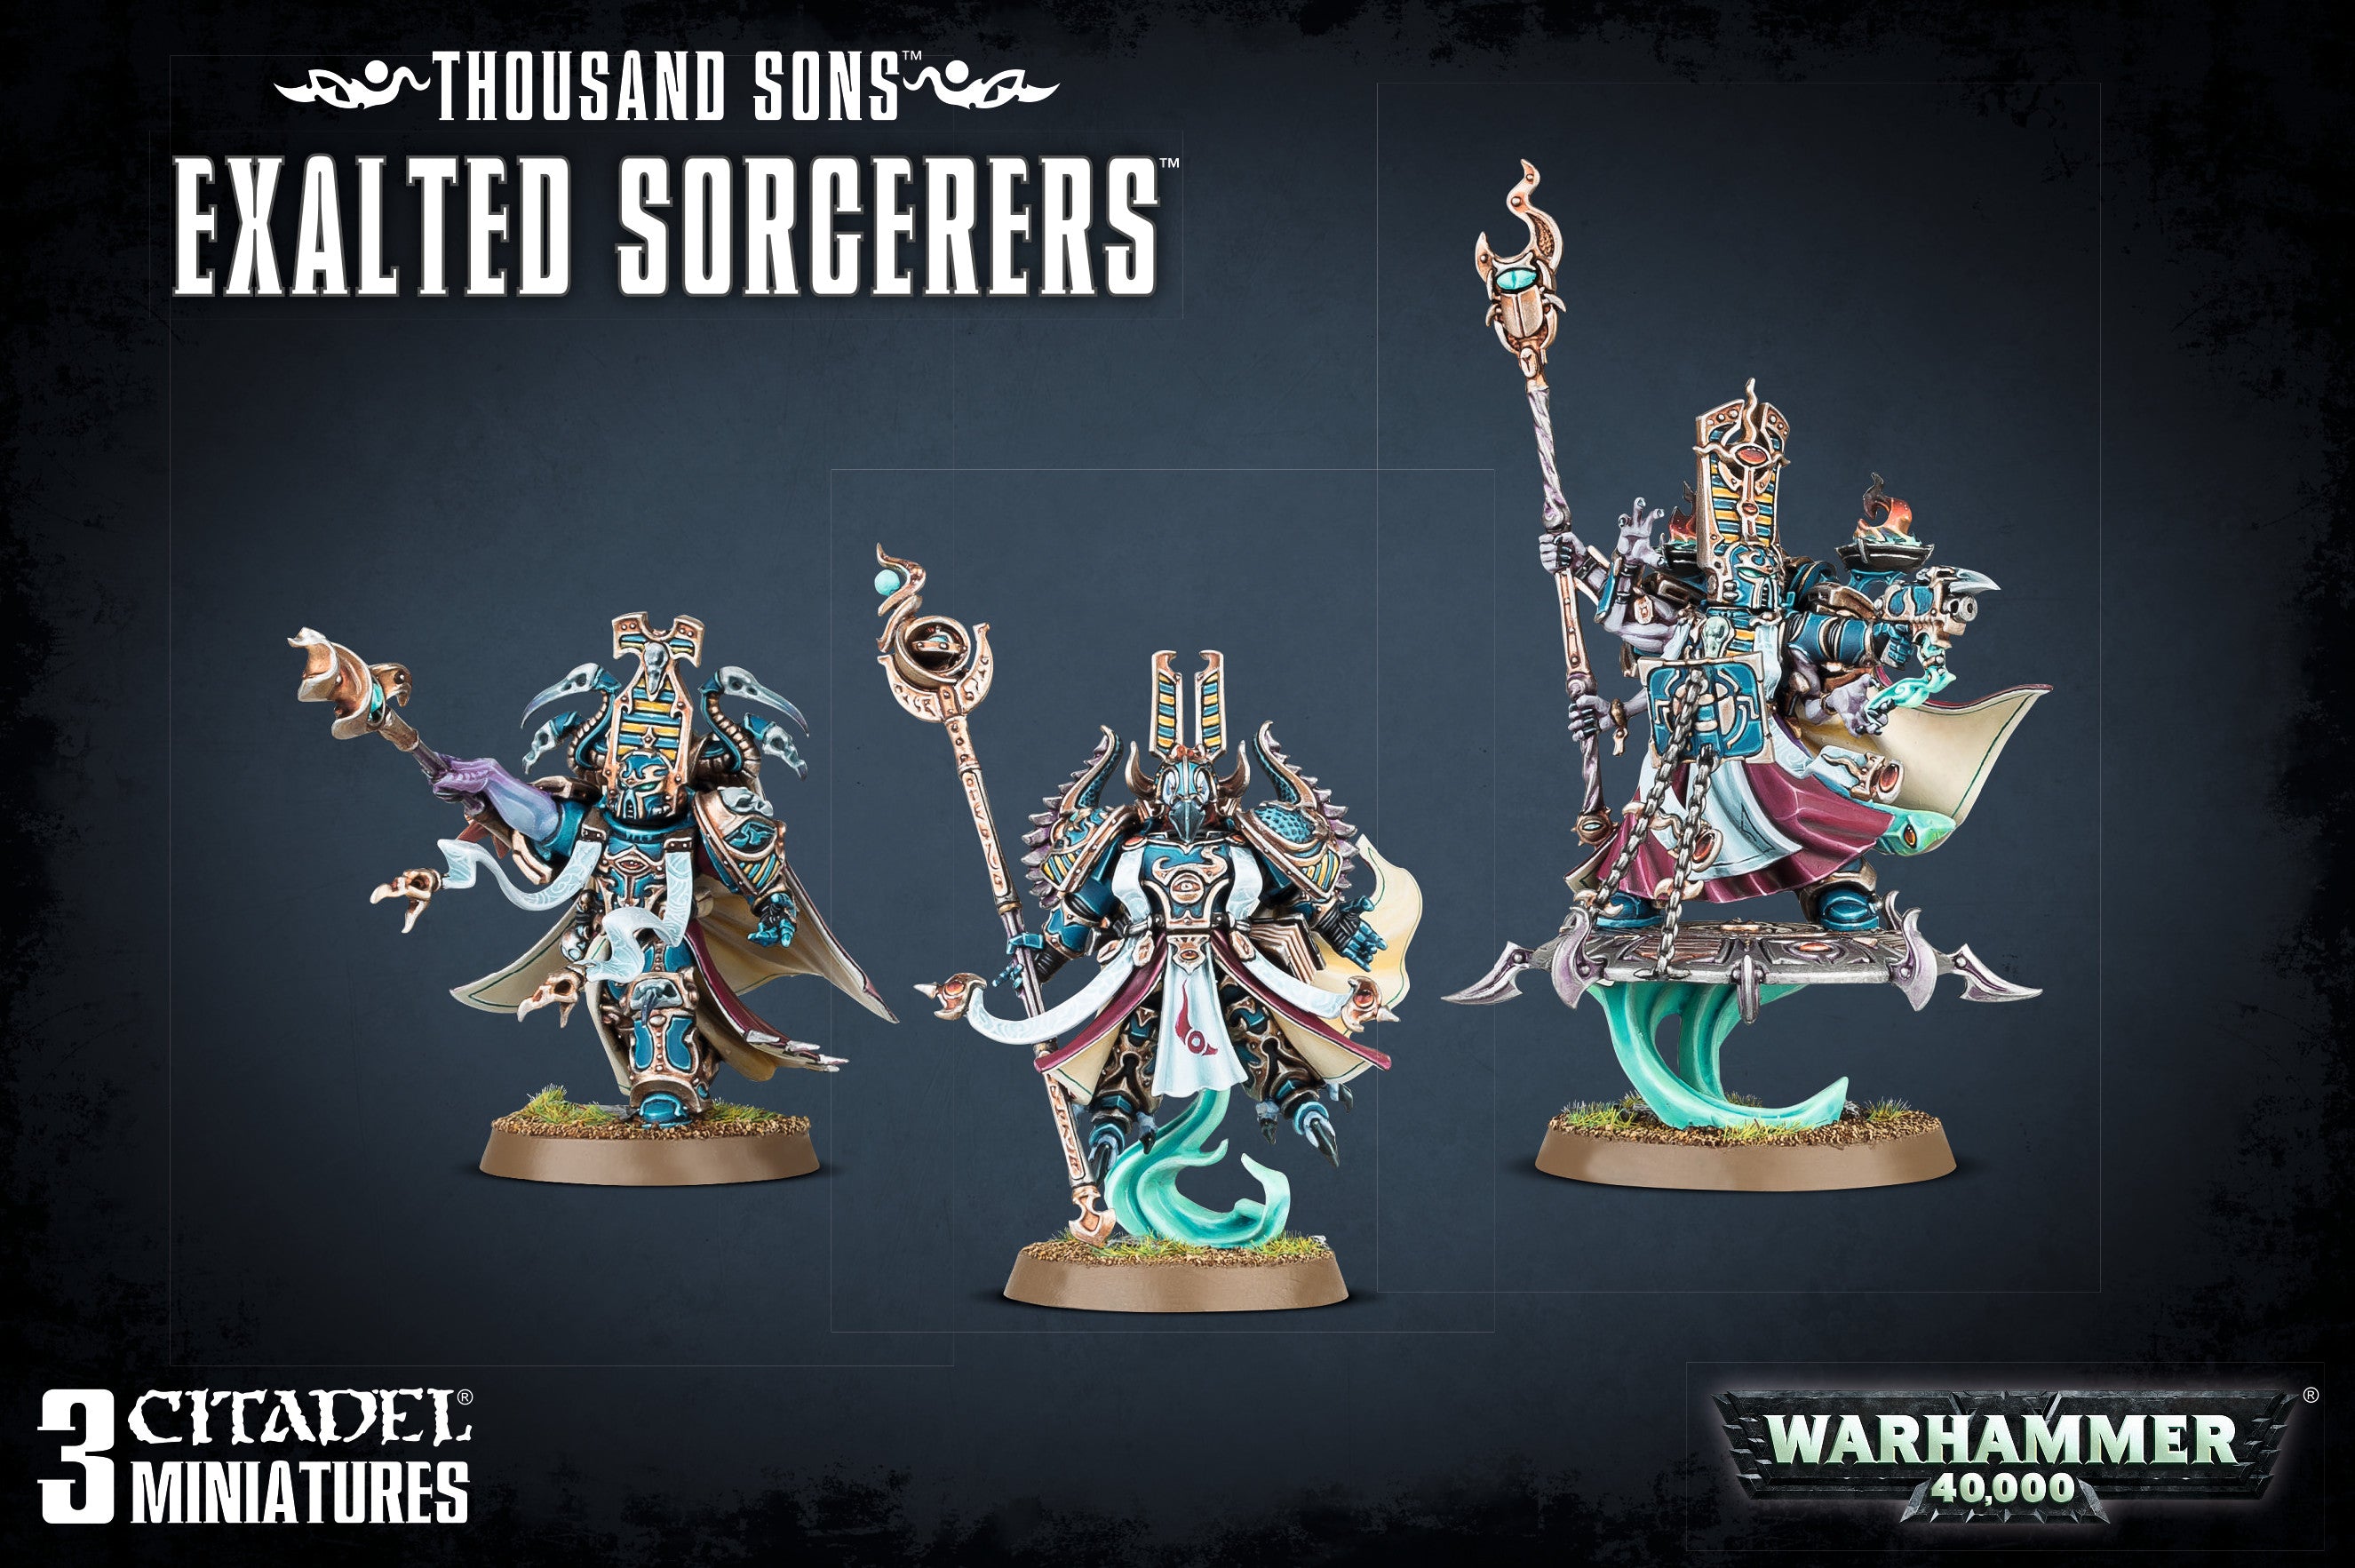 THOUSAND SONS: EXALTED SORCERERS | BD Cosmos